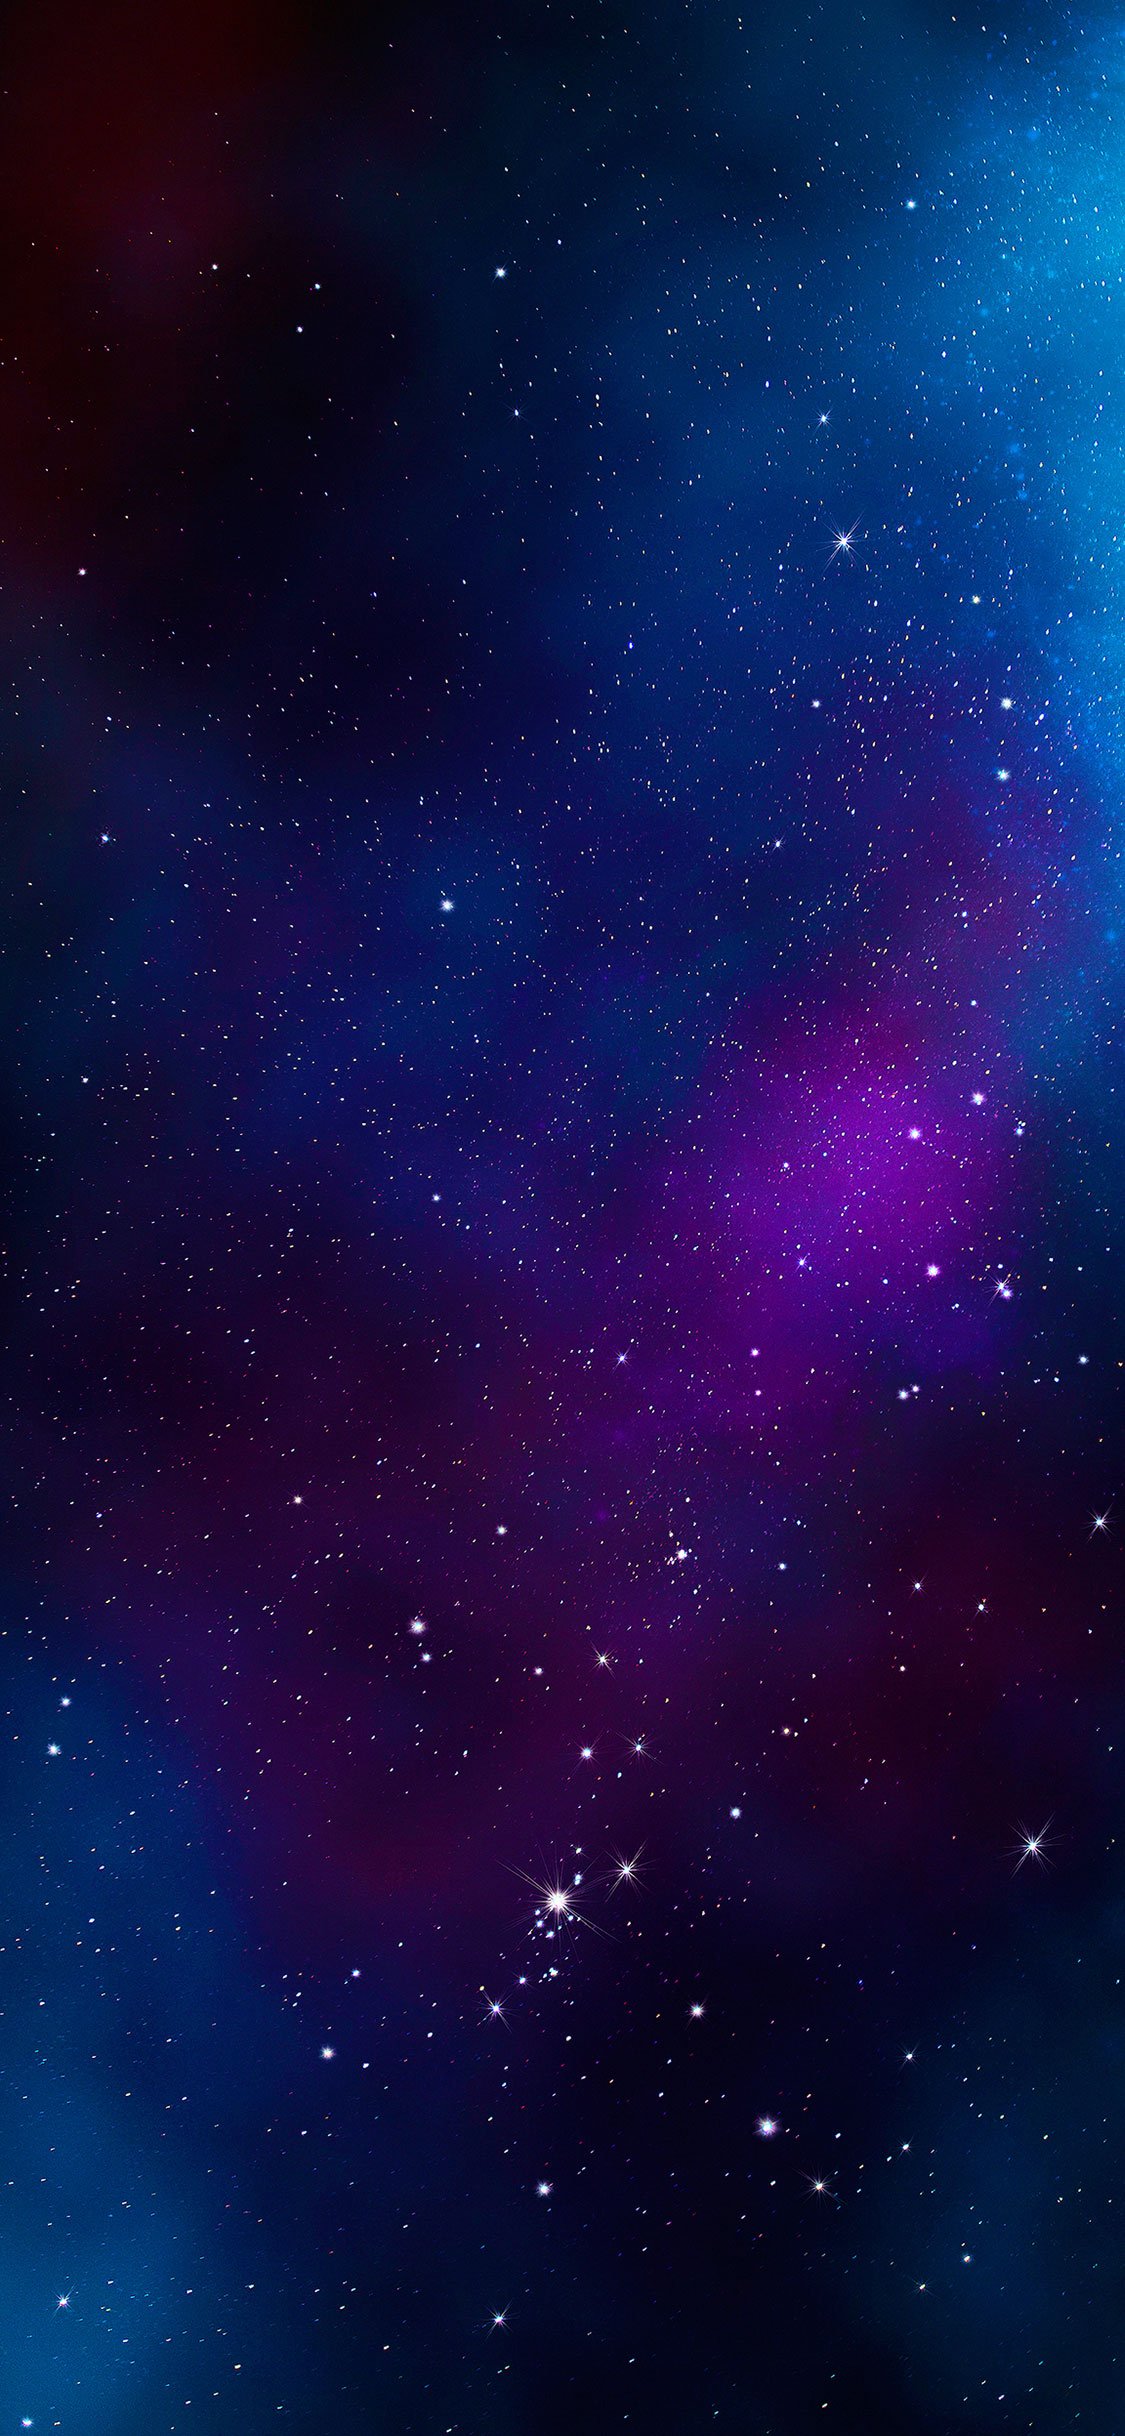 60+ Latest Best iPhone X Wallpapers & Backgrounds For Everyone